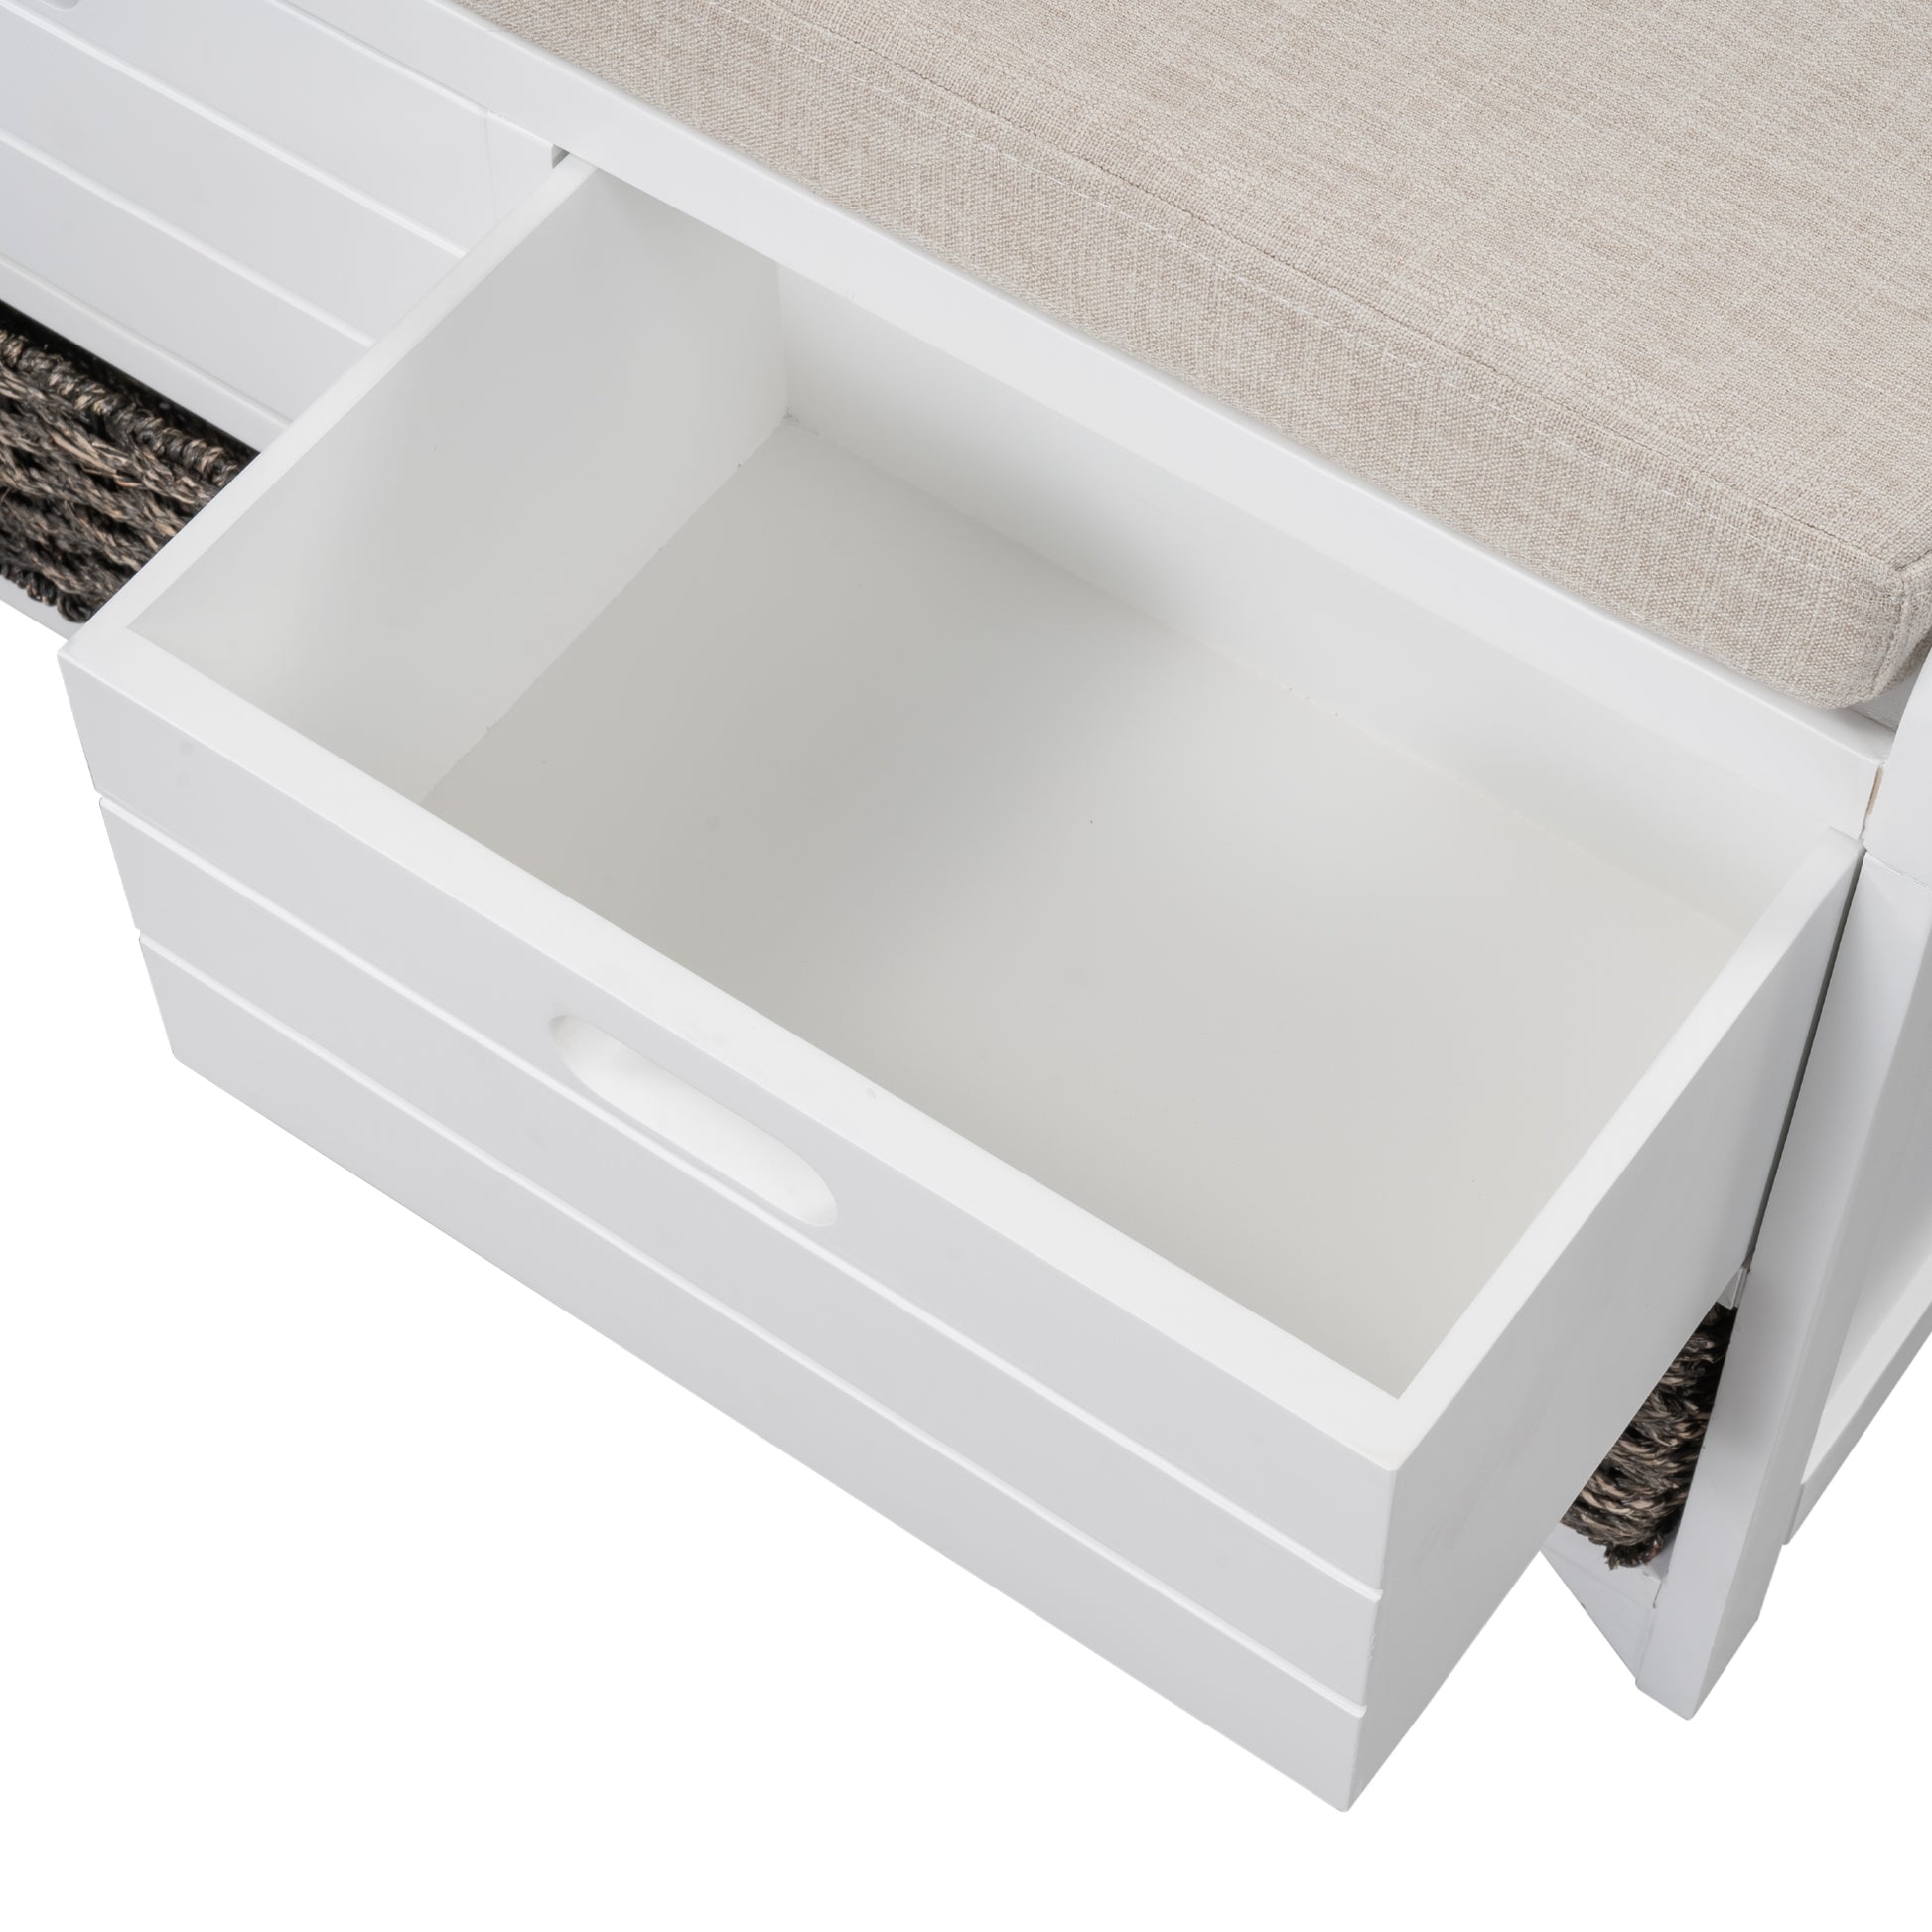 TREXM Storage Bench with Removable Basket and 2 Drawers - White